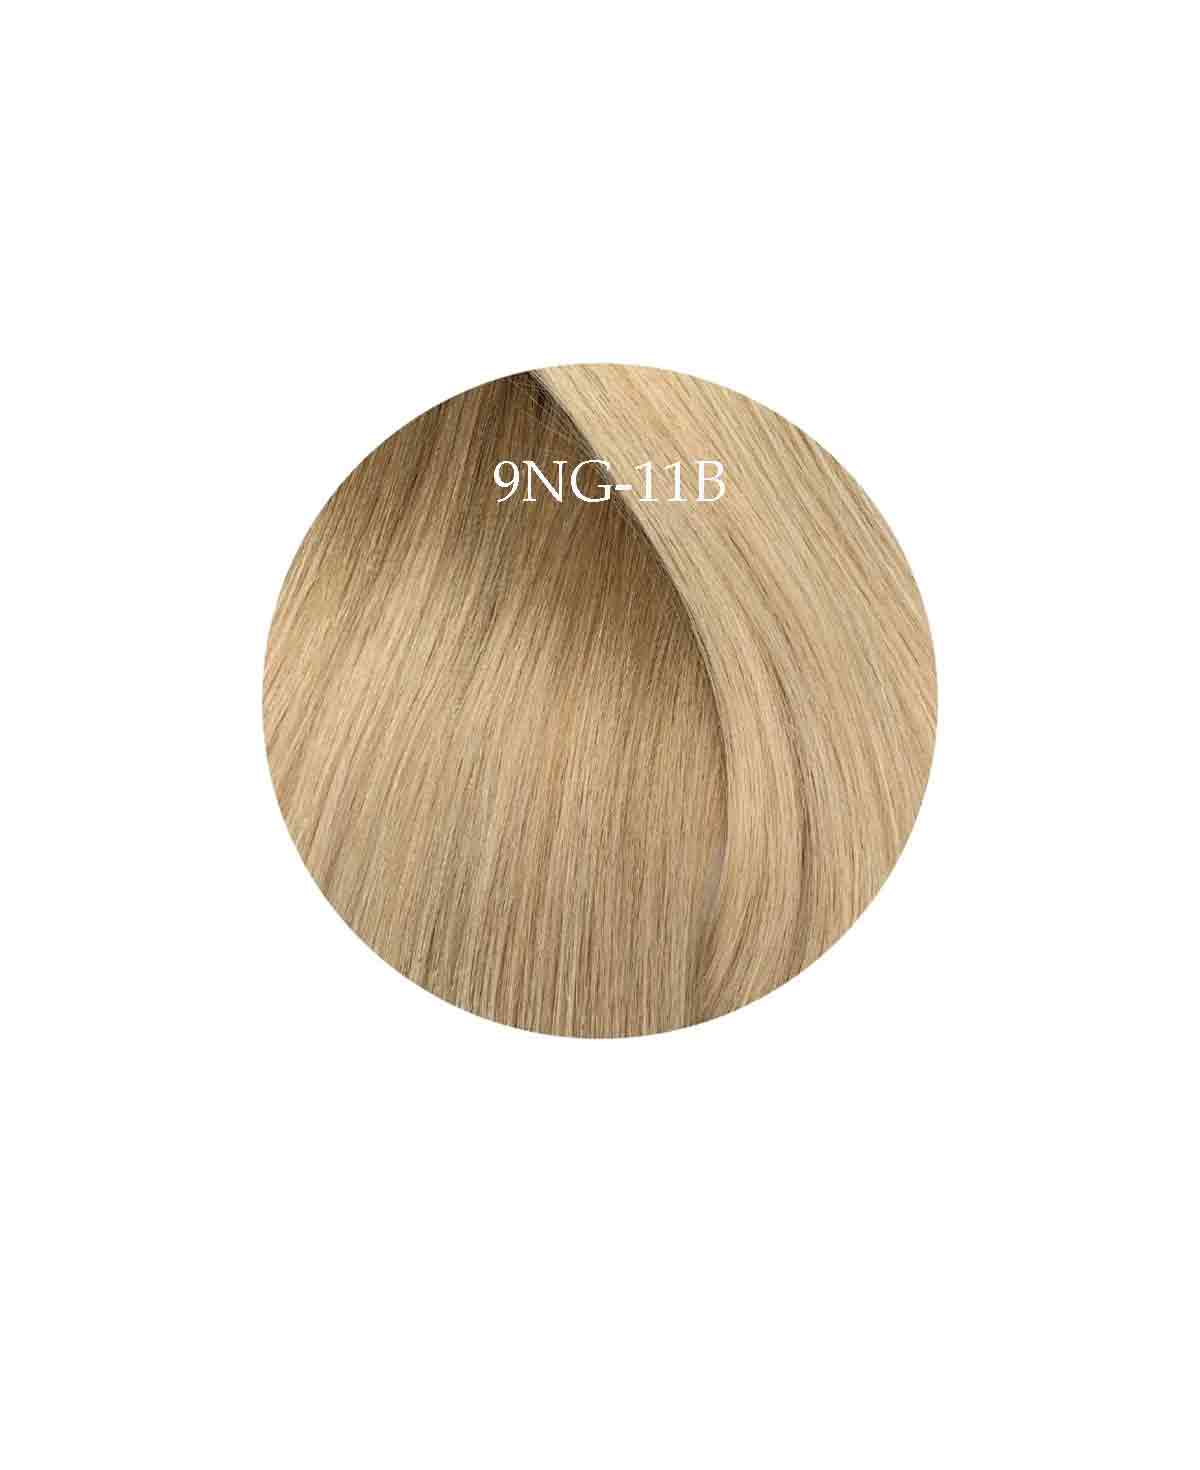 Showpony 45-50cm (20") 7 Piece Clip In Hair Extension - 9NG-11B Sunshine Kiss Ombre